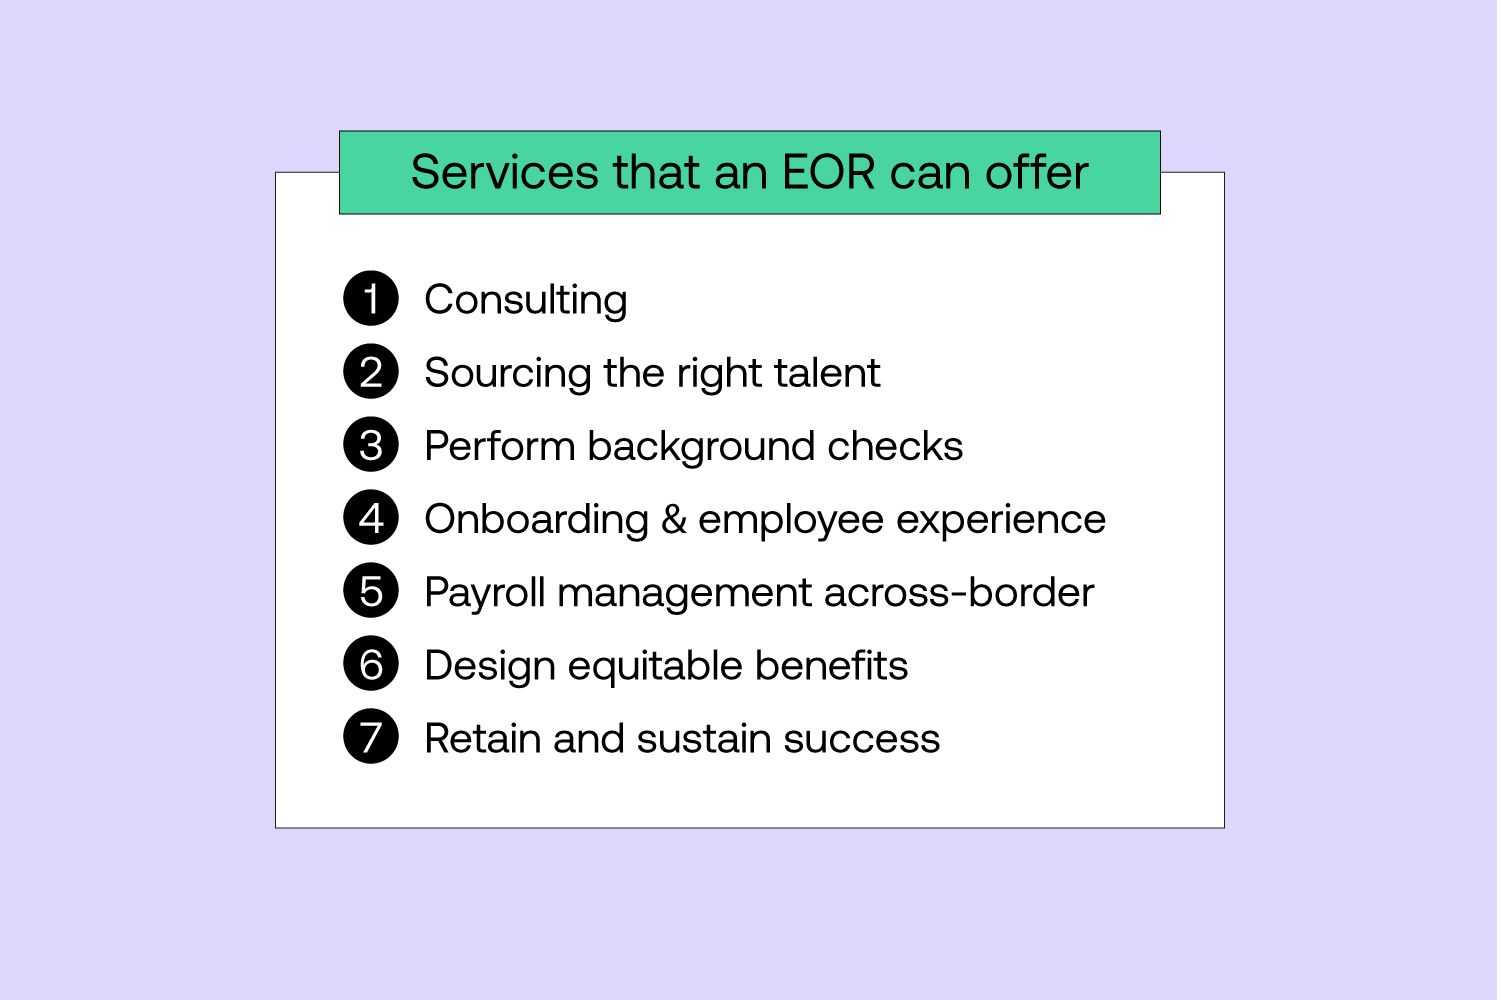 Services that an EOR can offer include consulting, sourcing the right talent, perform background checks, onboarding and employee experience, payroll management across-border, design equitable benefits and retain and sustain success